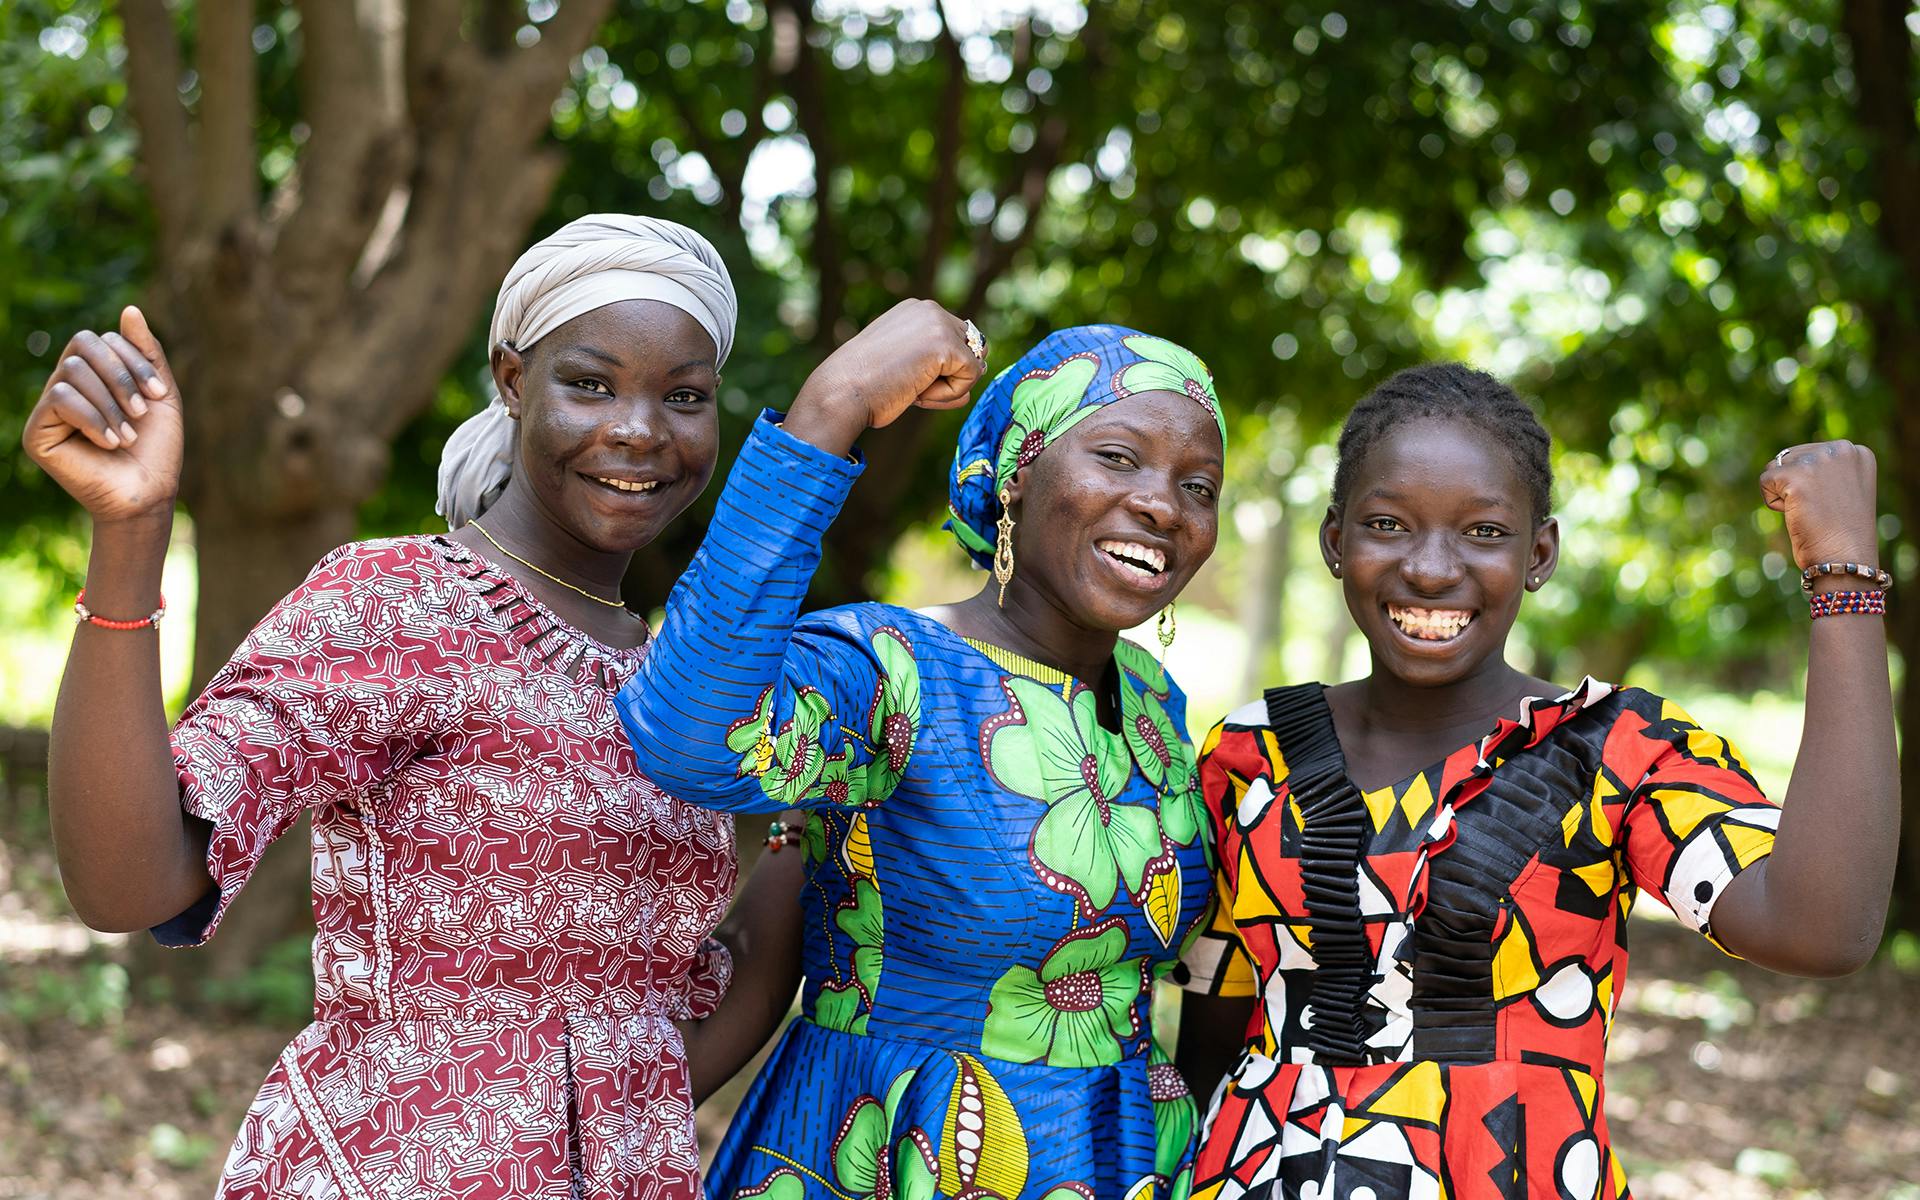 Three African women in colorful traditional dresses raise their fists as a symbol for women's strength and gender equality.